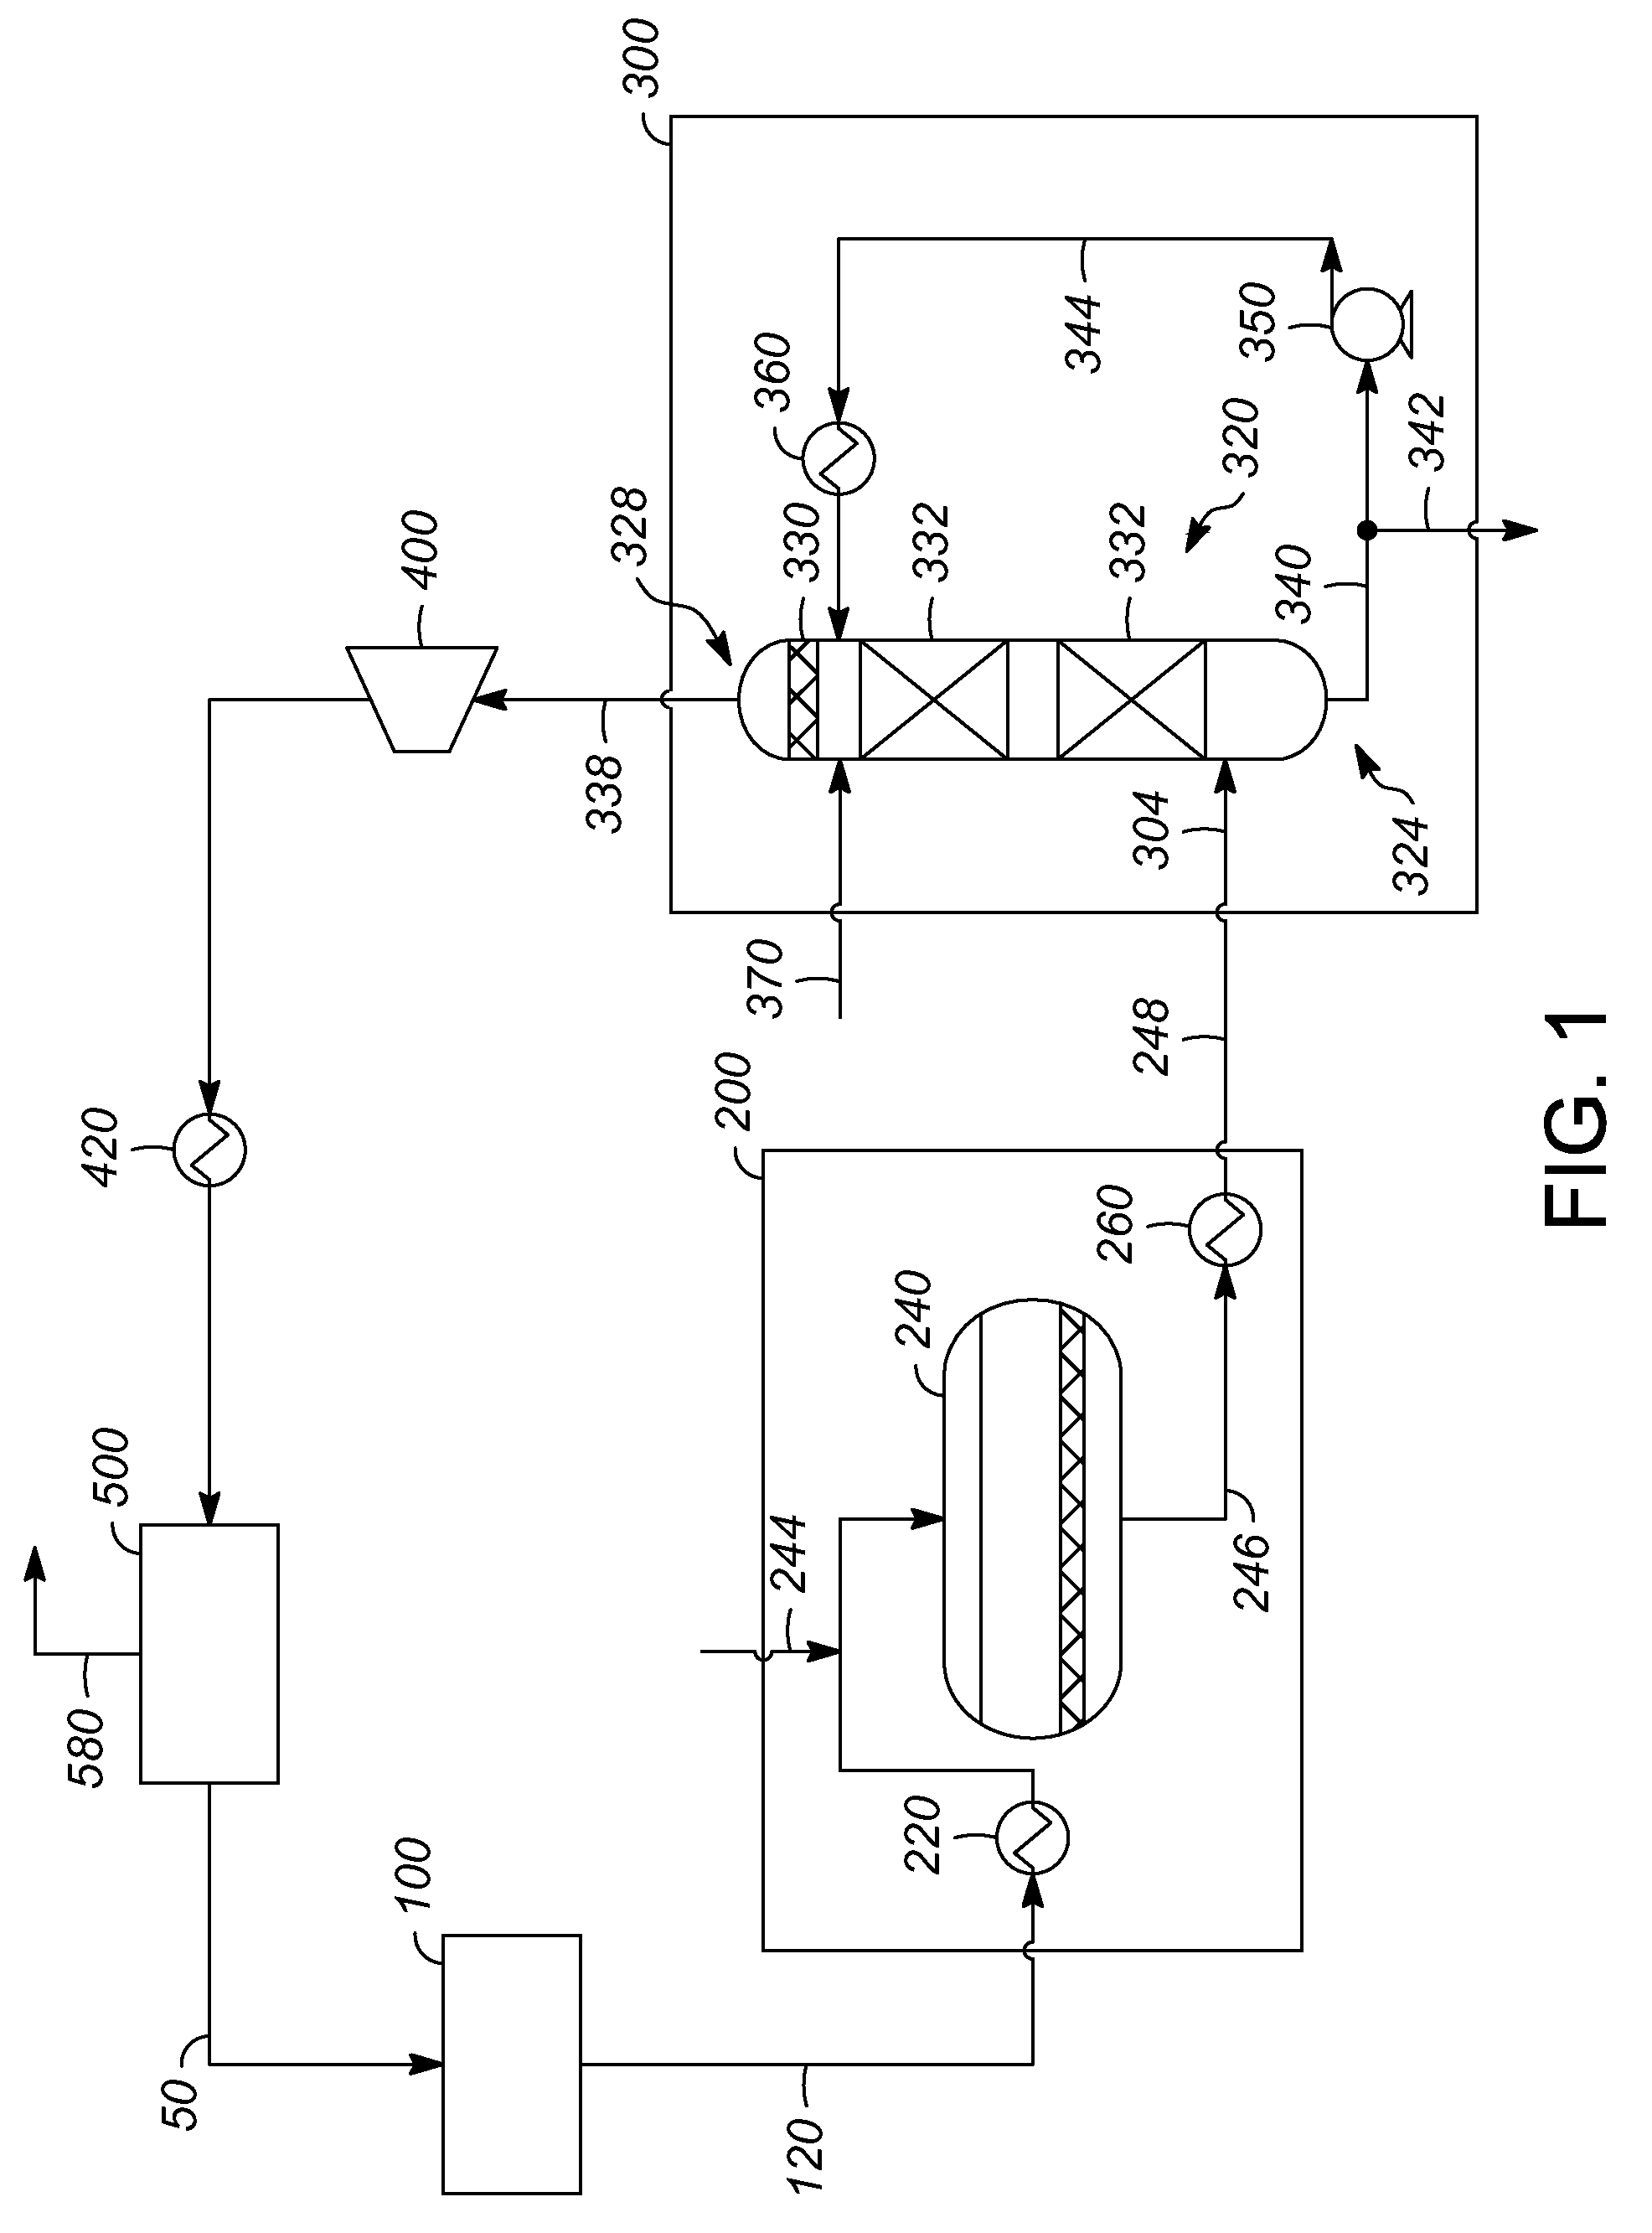 Process for treating a gas stream or effluent